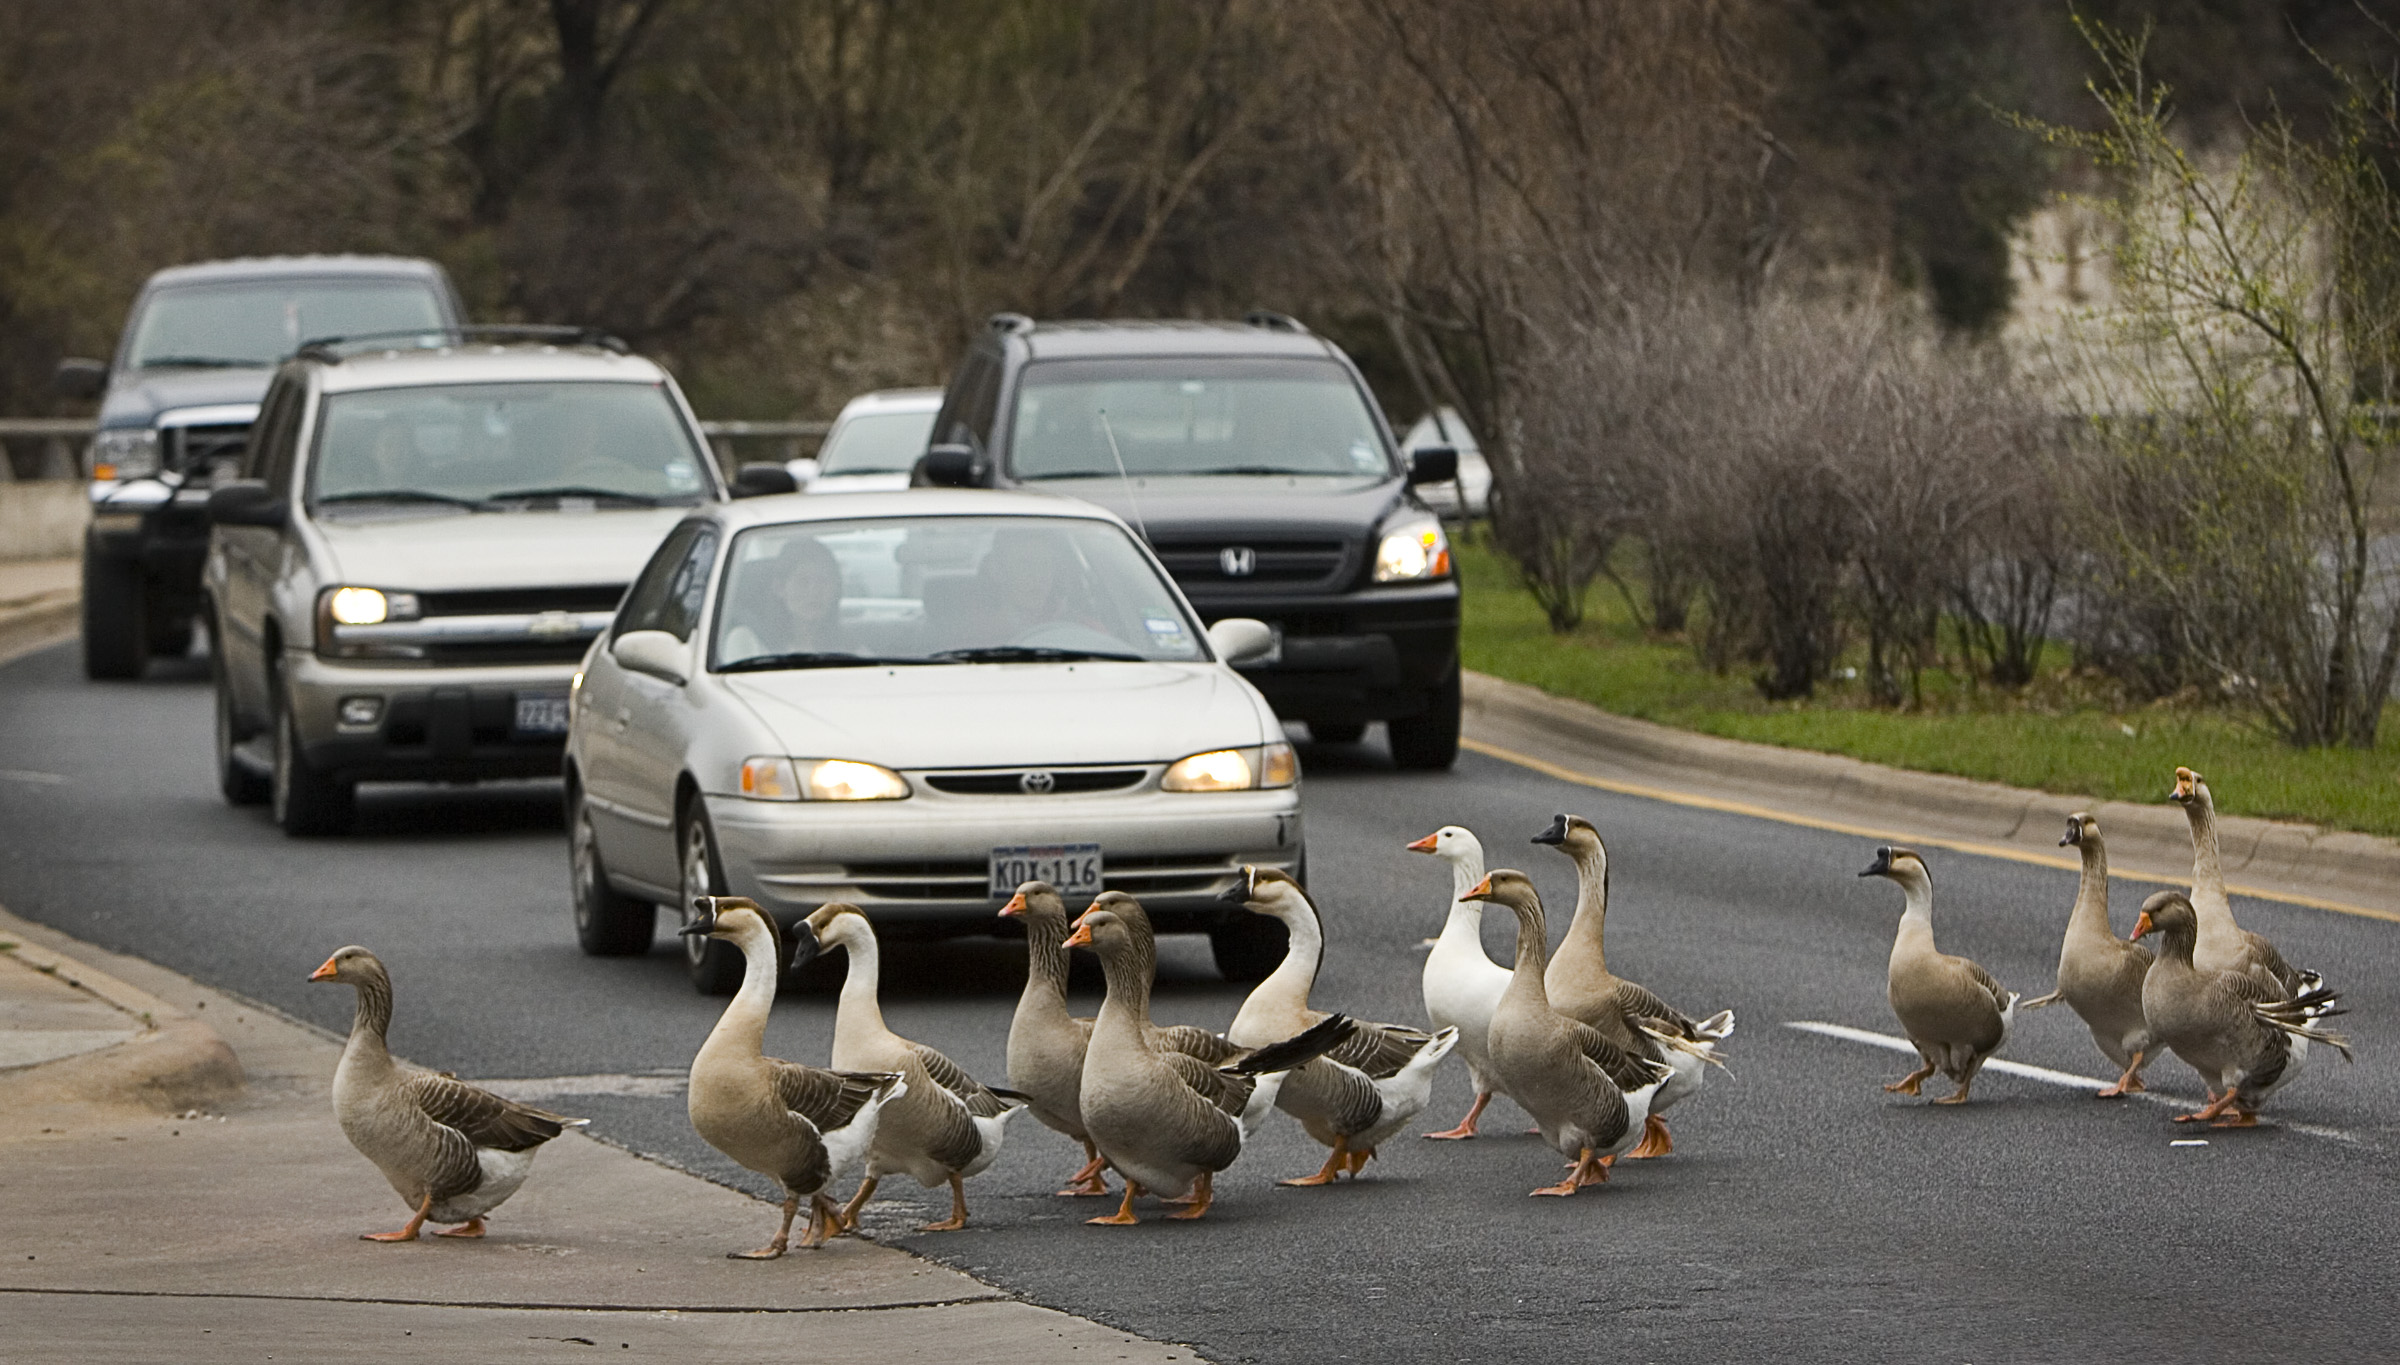 Why did the geese cross the road? – Collective Vision | Photoblog ...